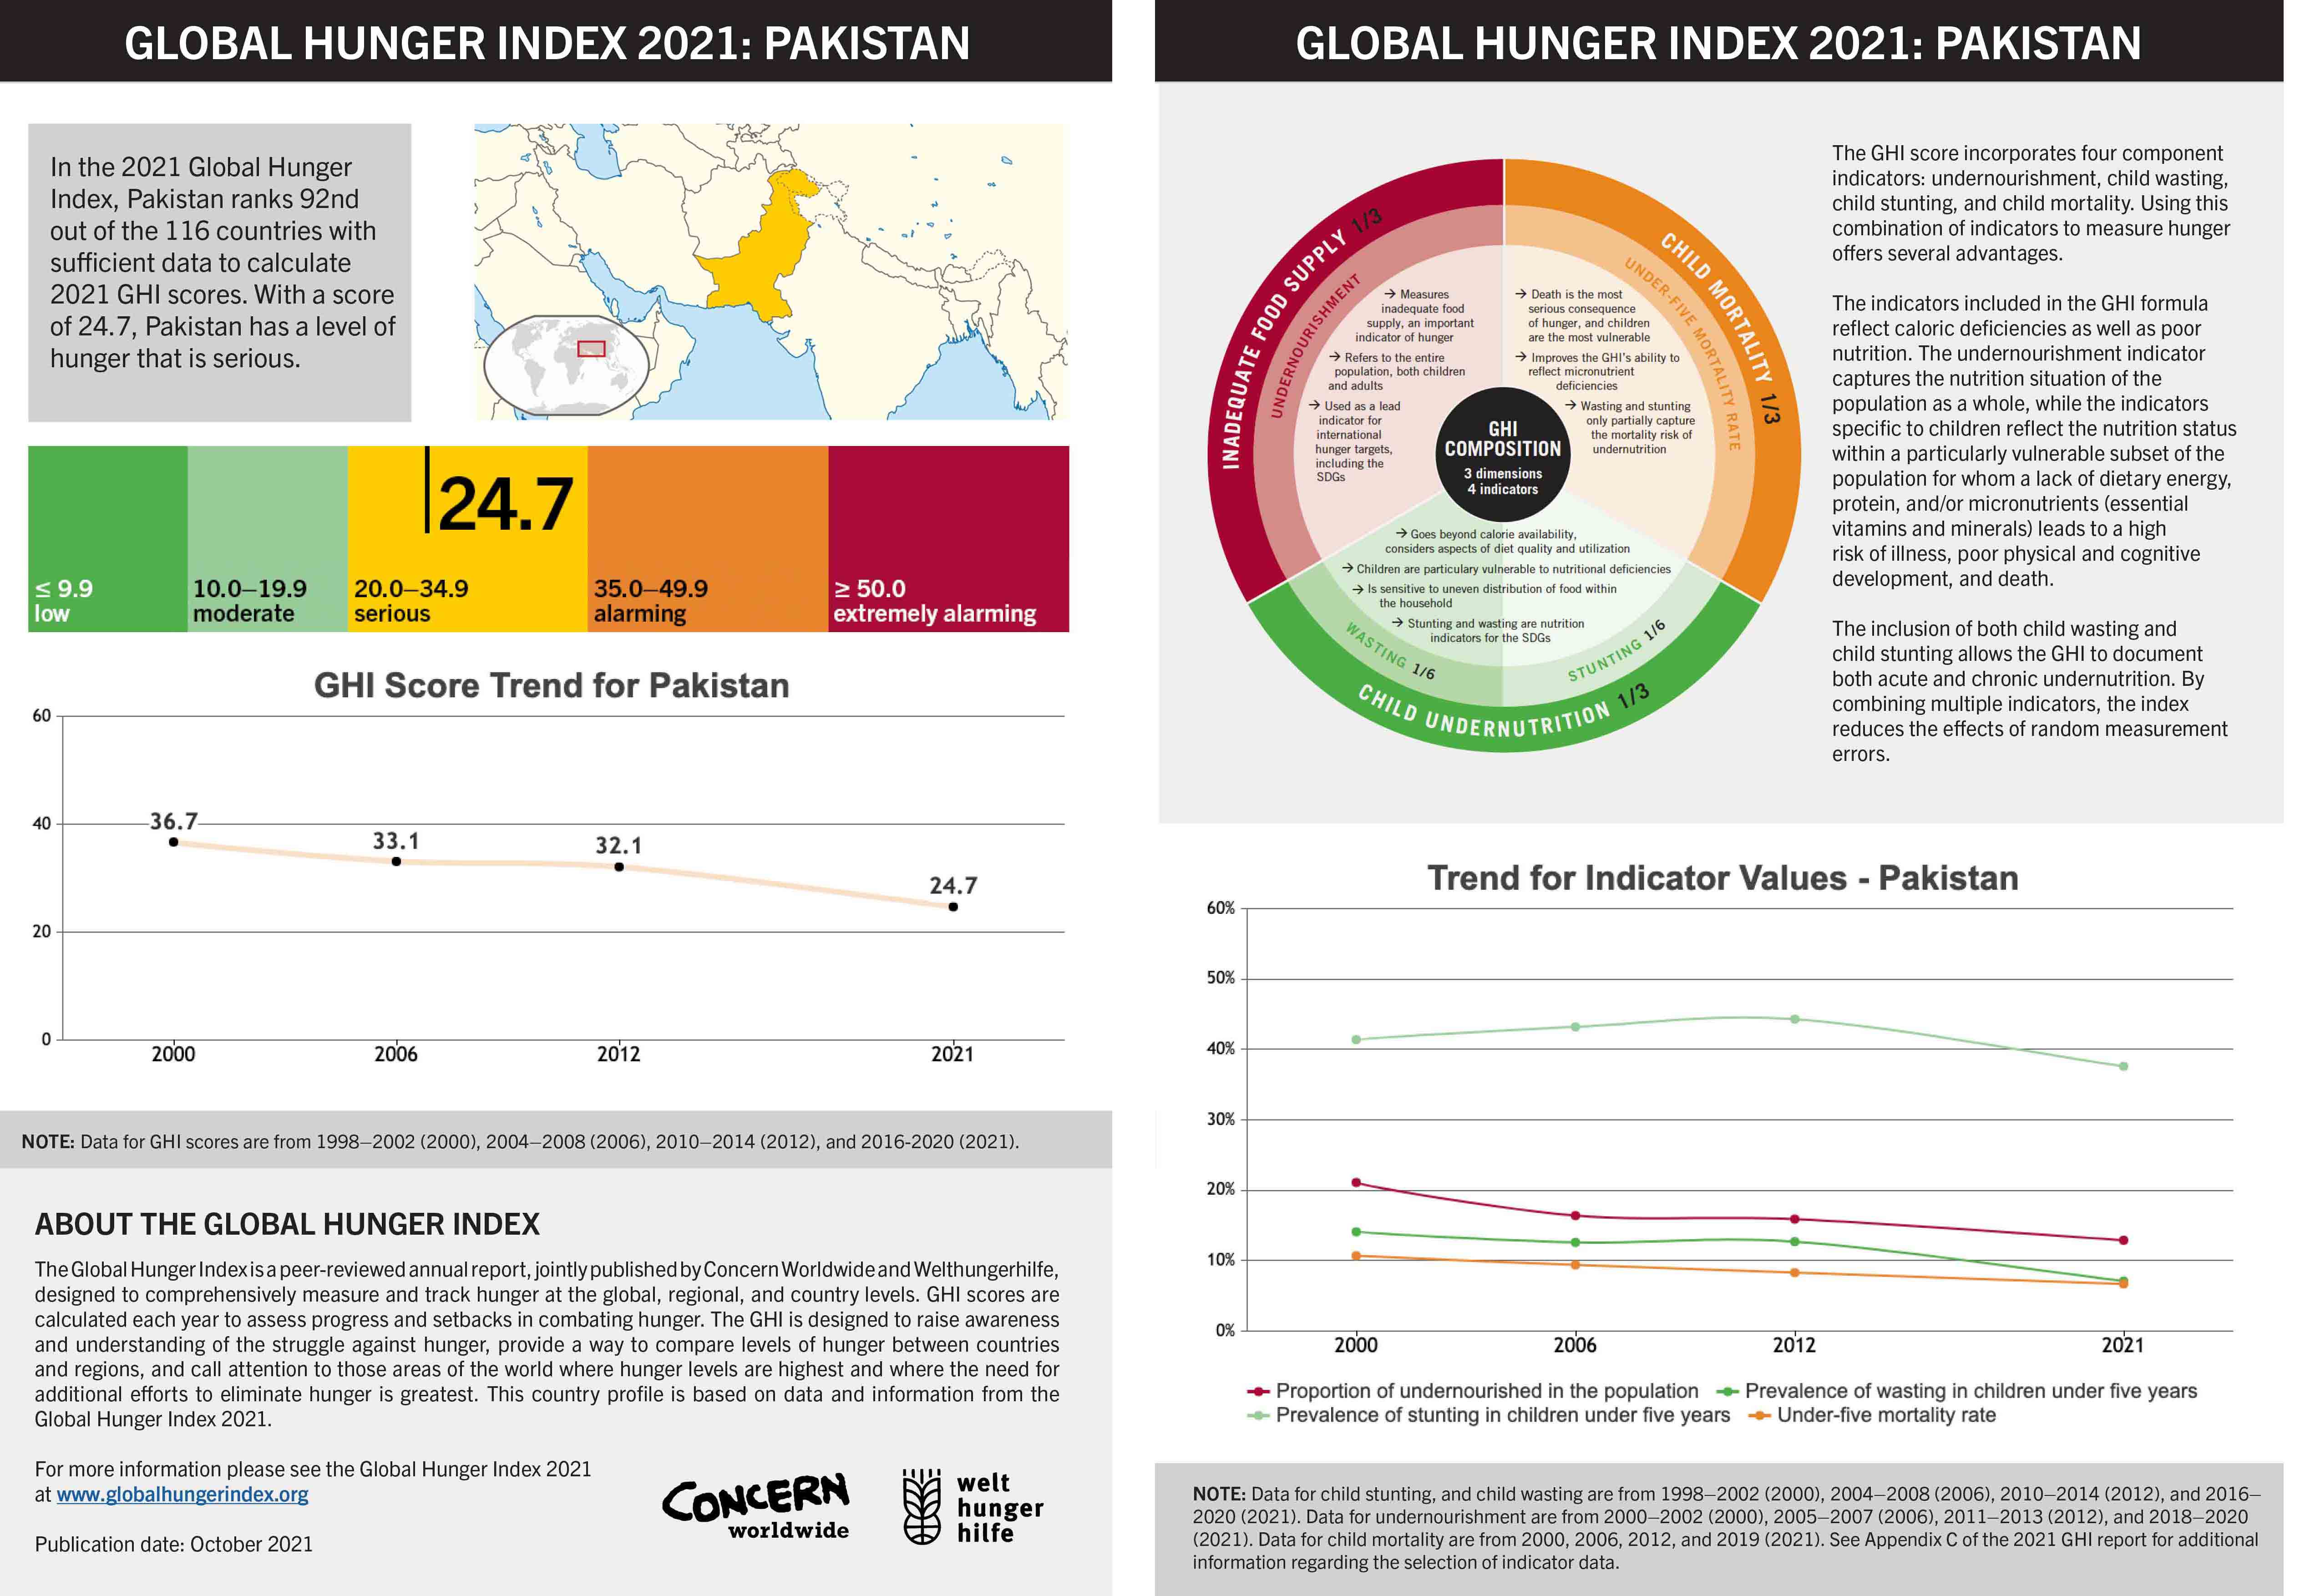 Pakistan ranks better than India on Global Hunger Index 2021